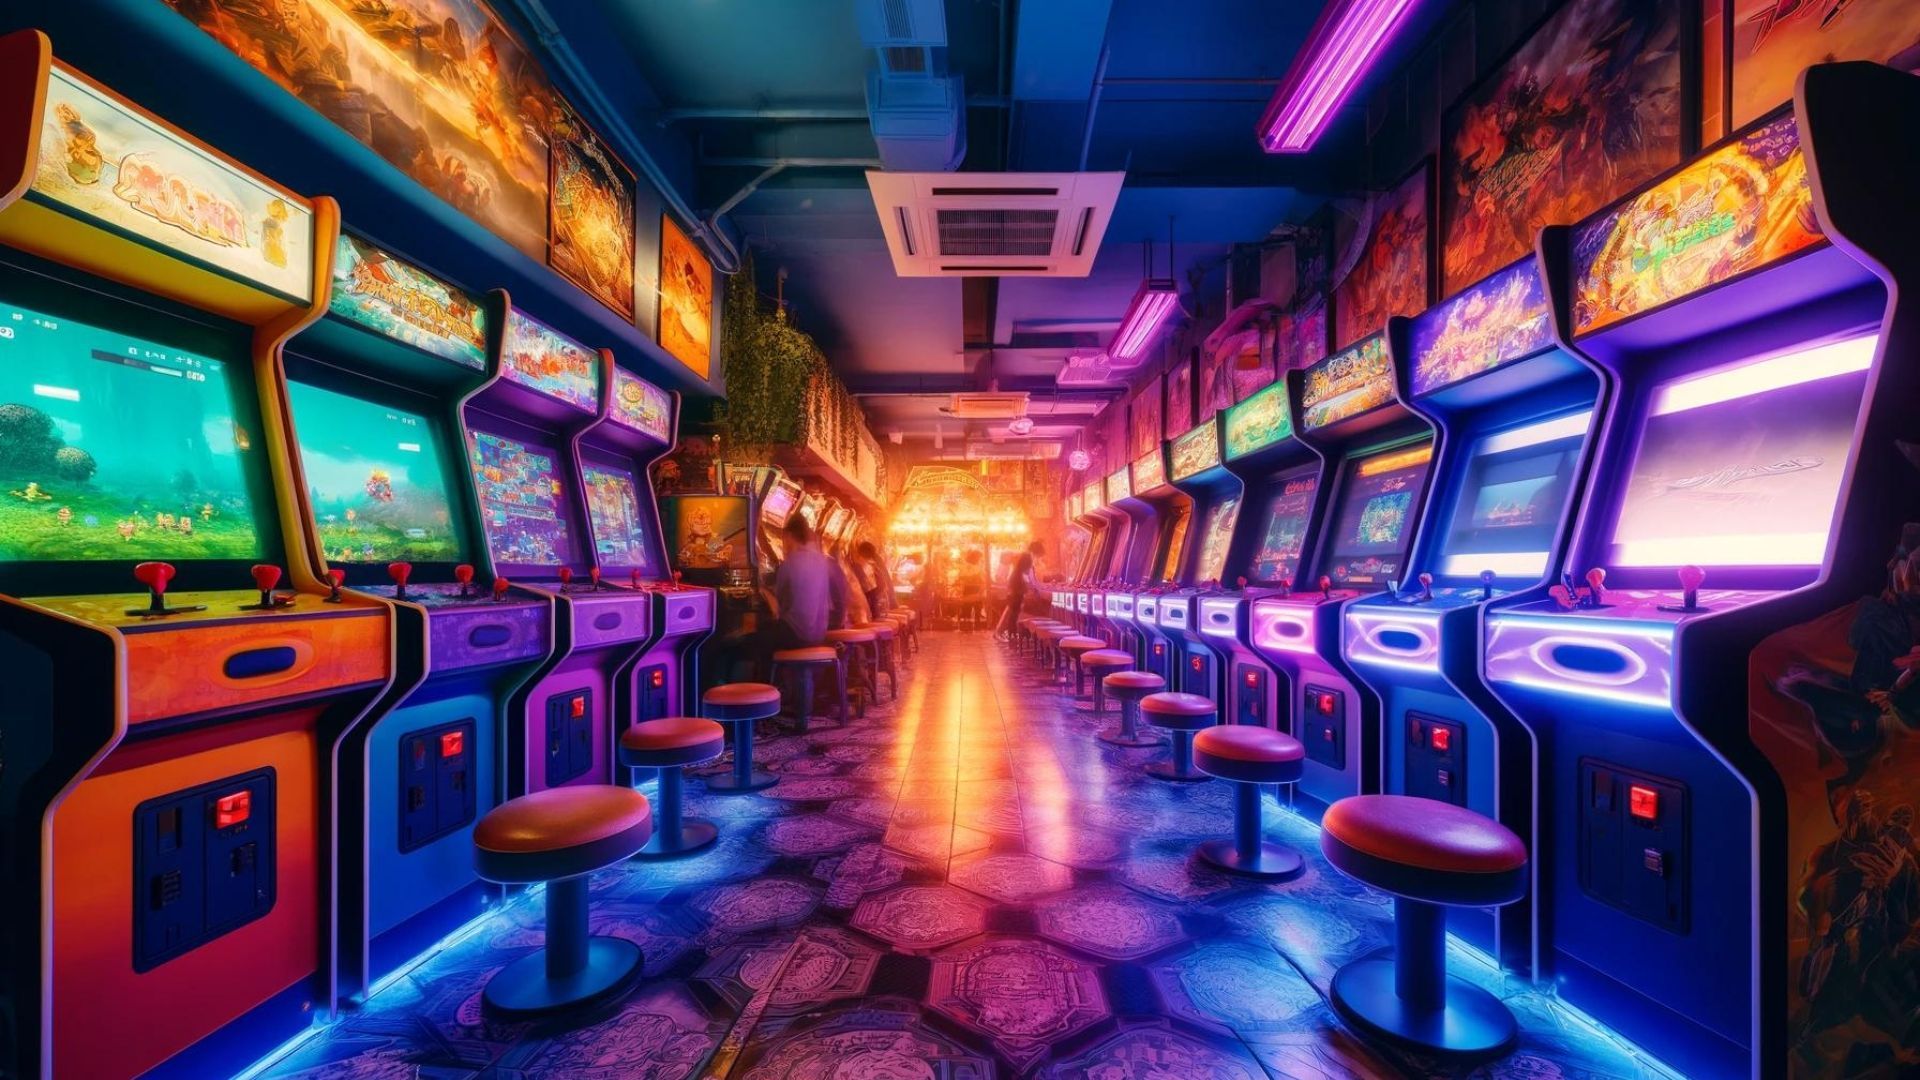 Toughened glass, tinted glass, smart glass – what's it all about? Discover the right type for arcade machines.
